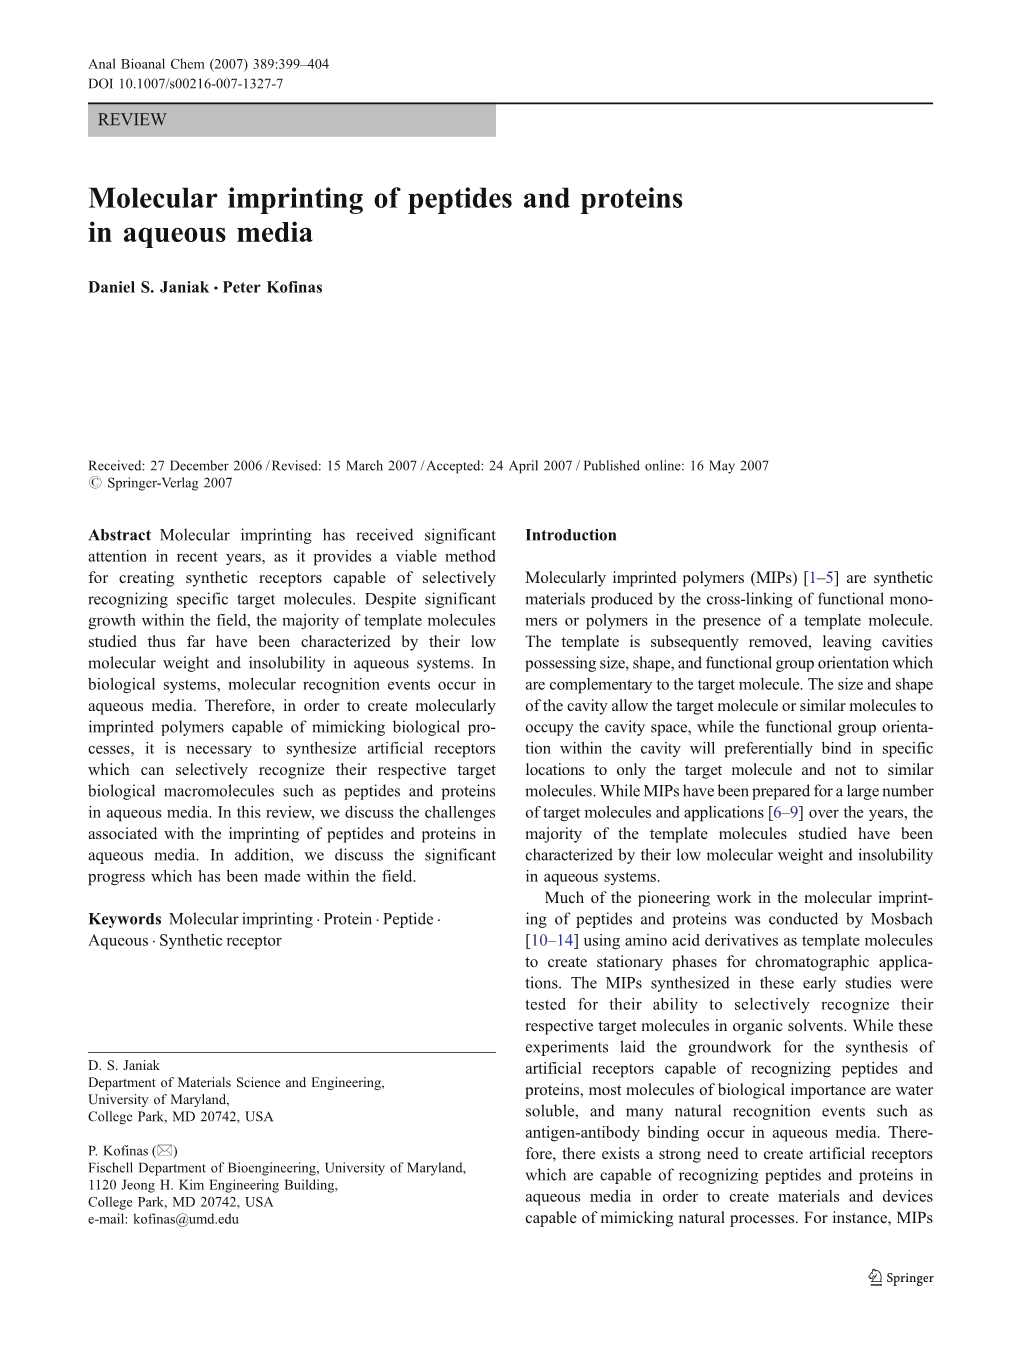 Molecular Imprinting of Peptides and Proteins in Aqueous Media